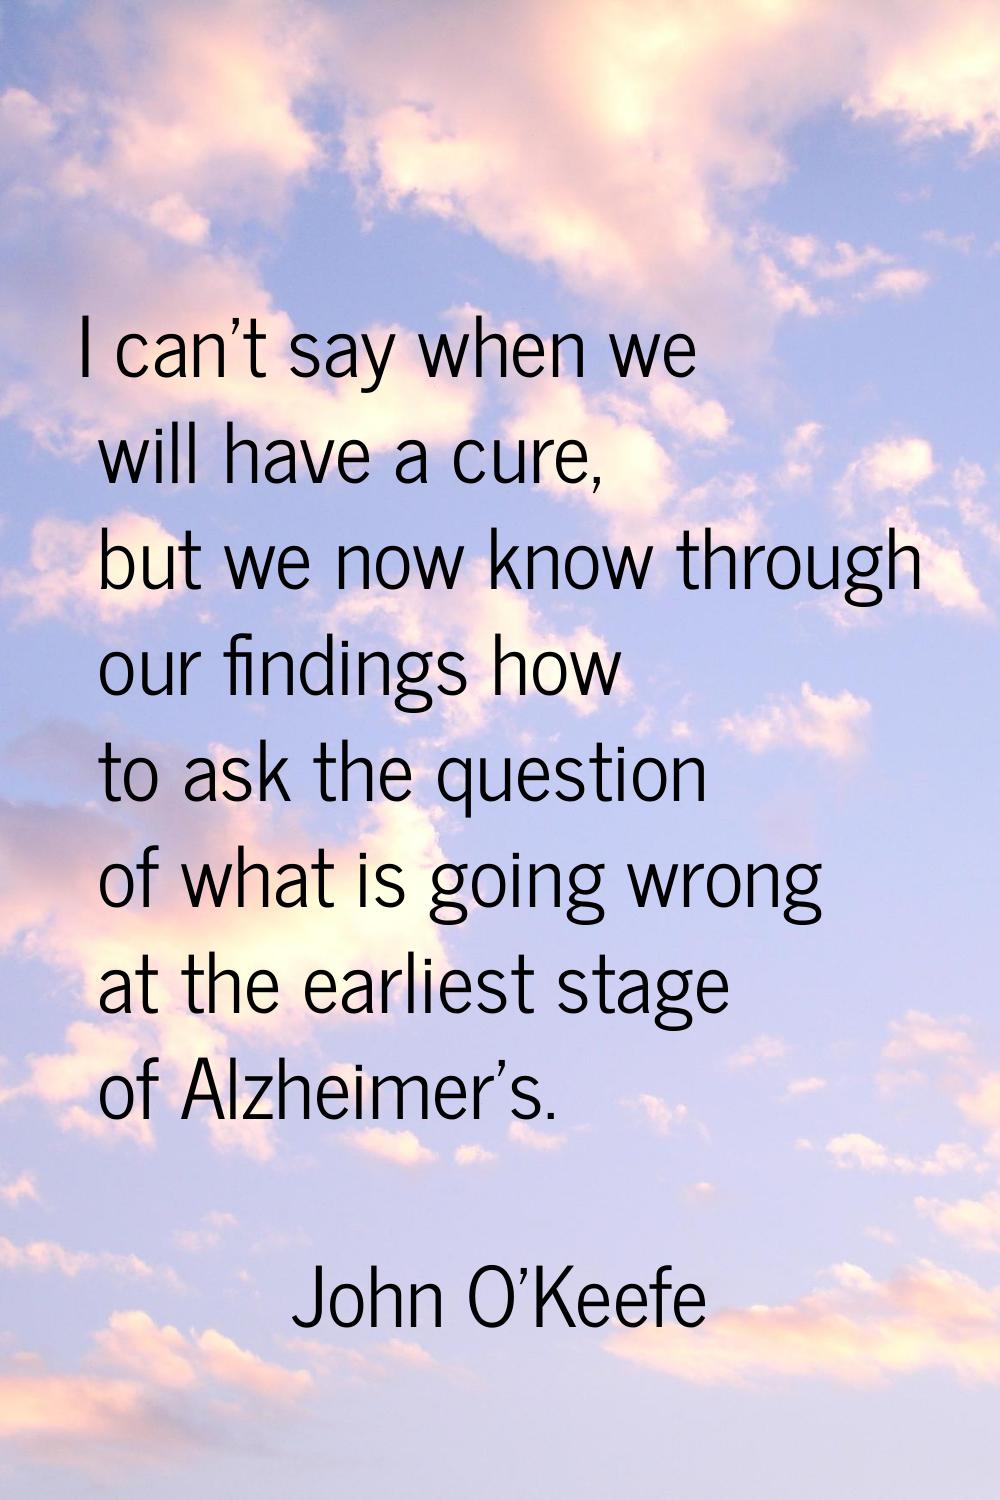 I can't say when we will have a cure, but we now know through our findings how to ask the question 